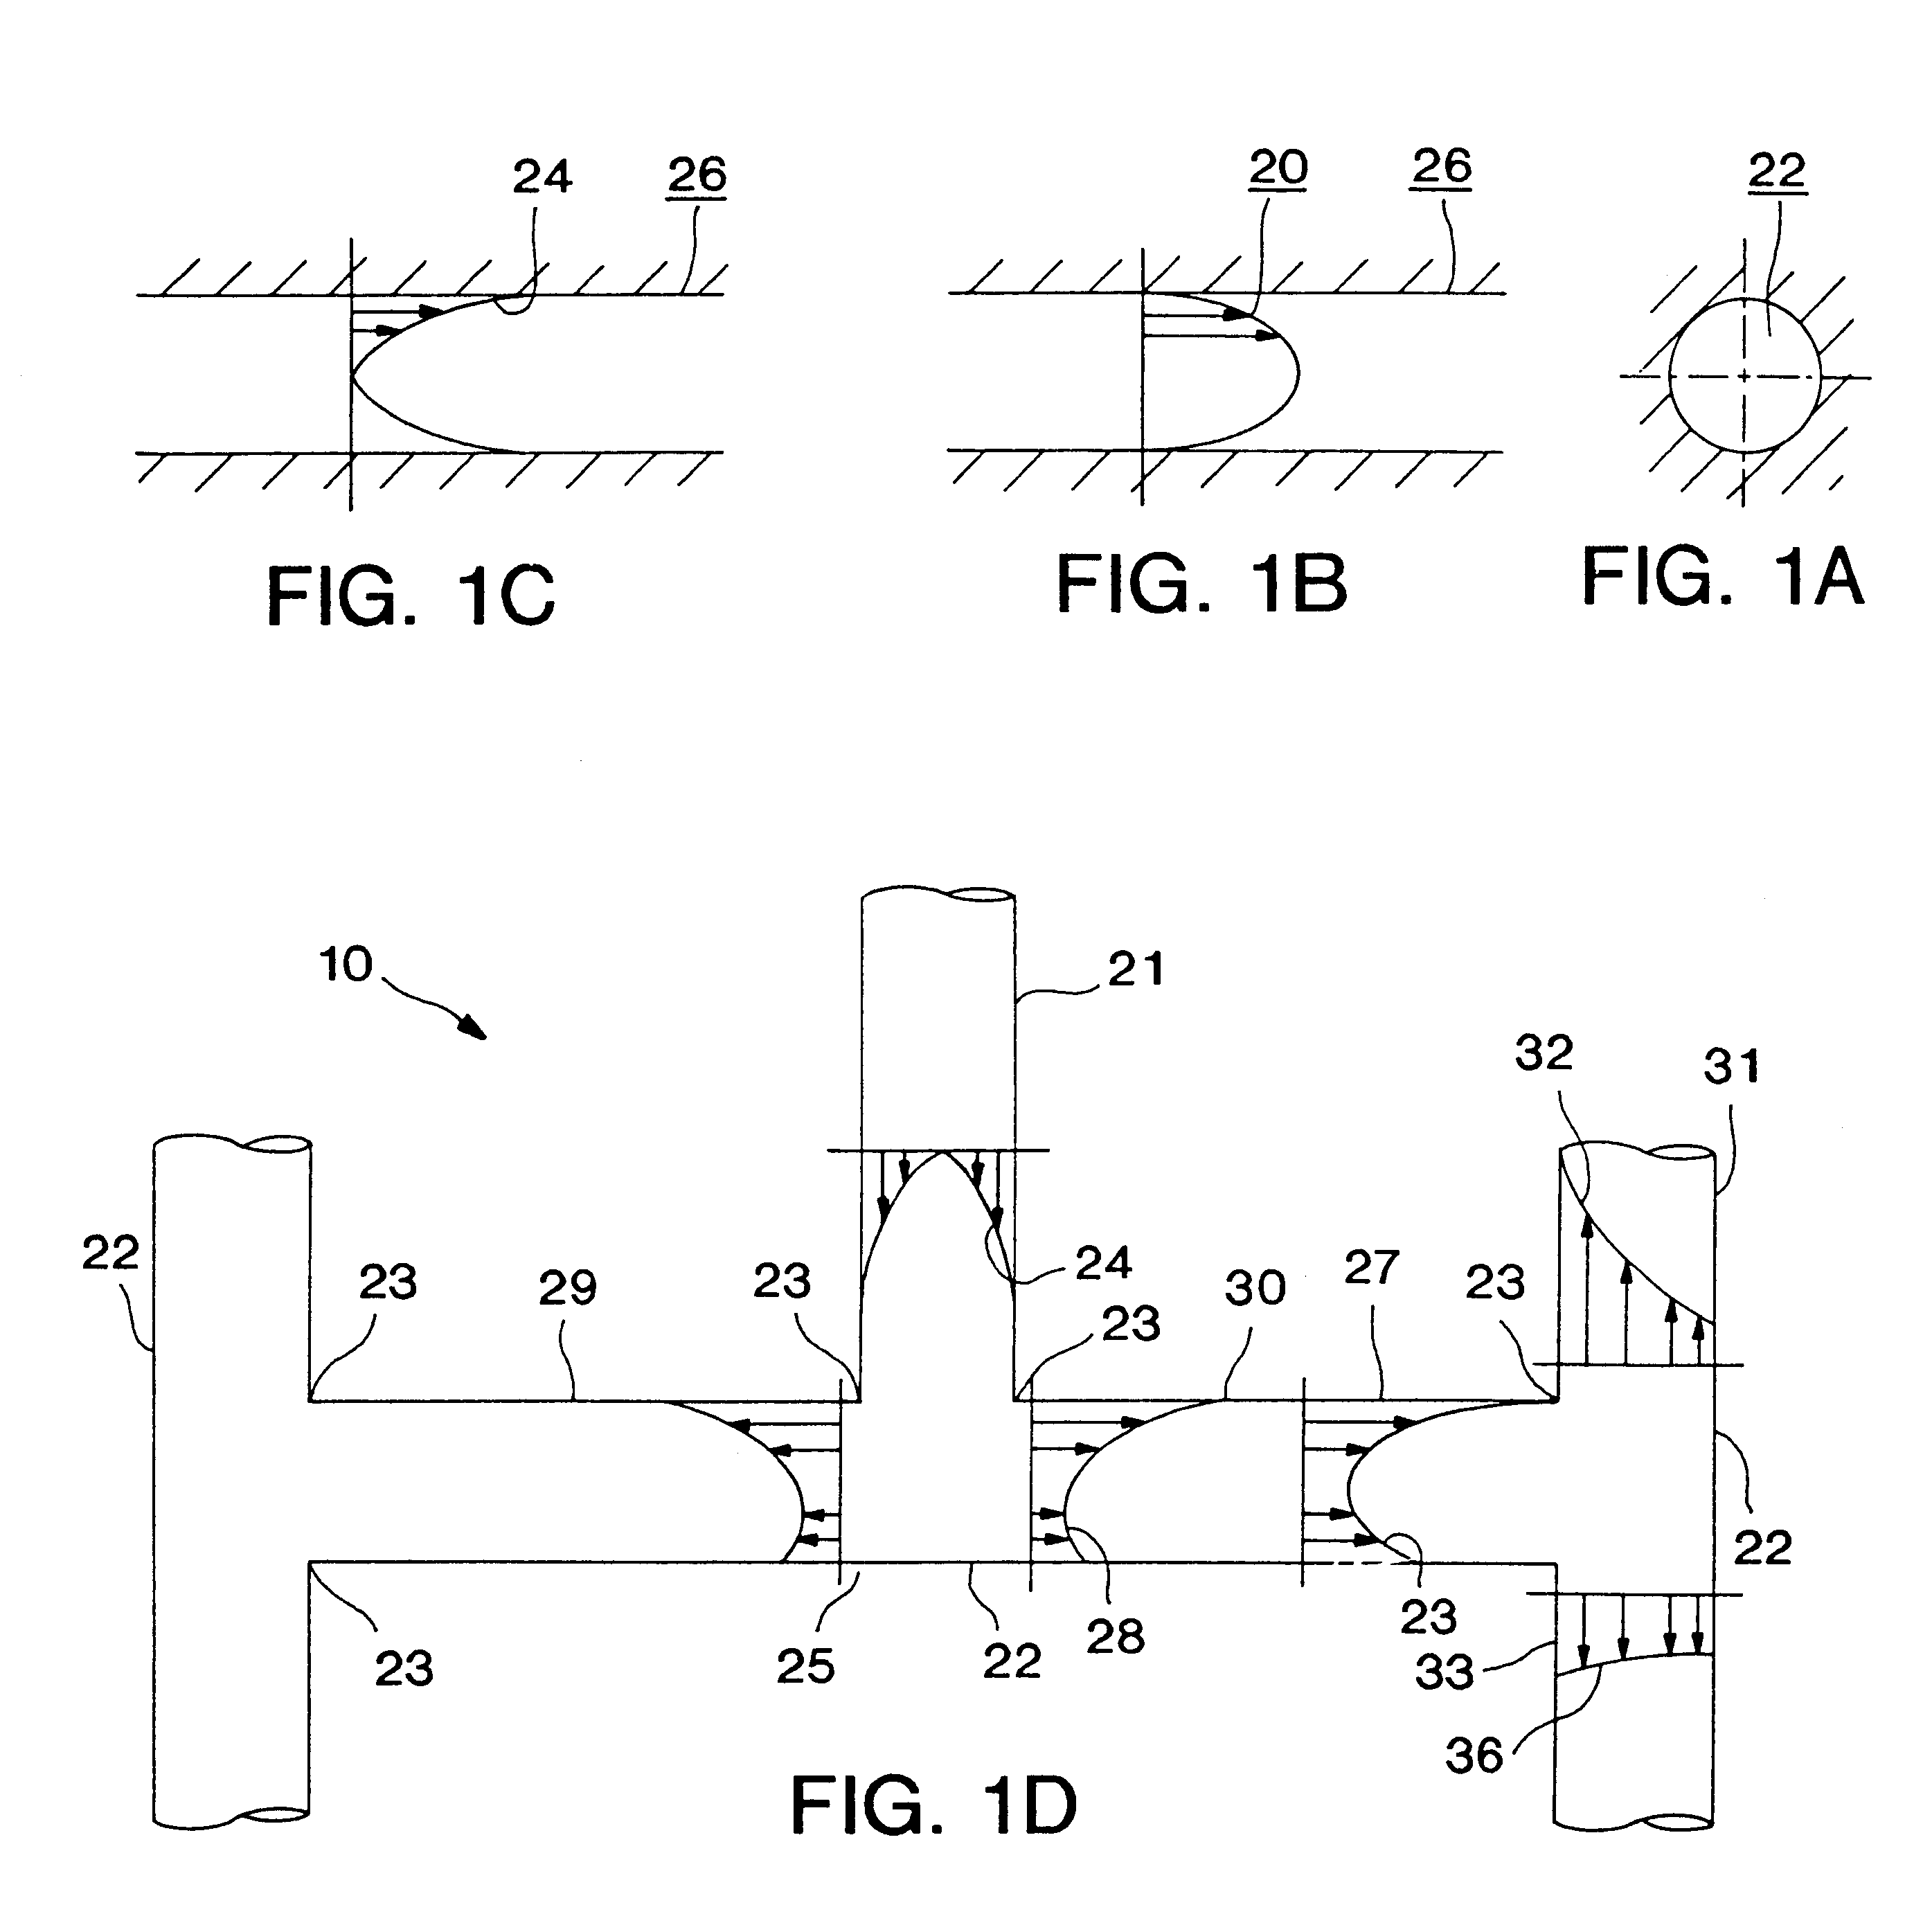 Molding system using film heaters and/or sensors